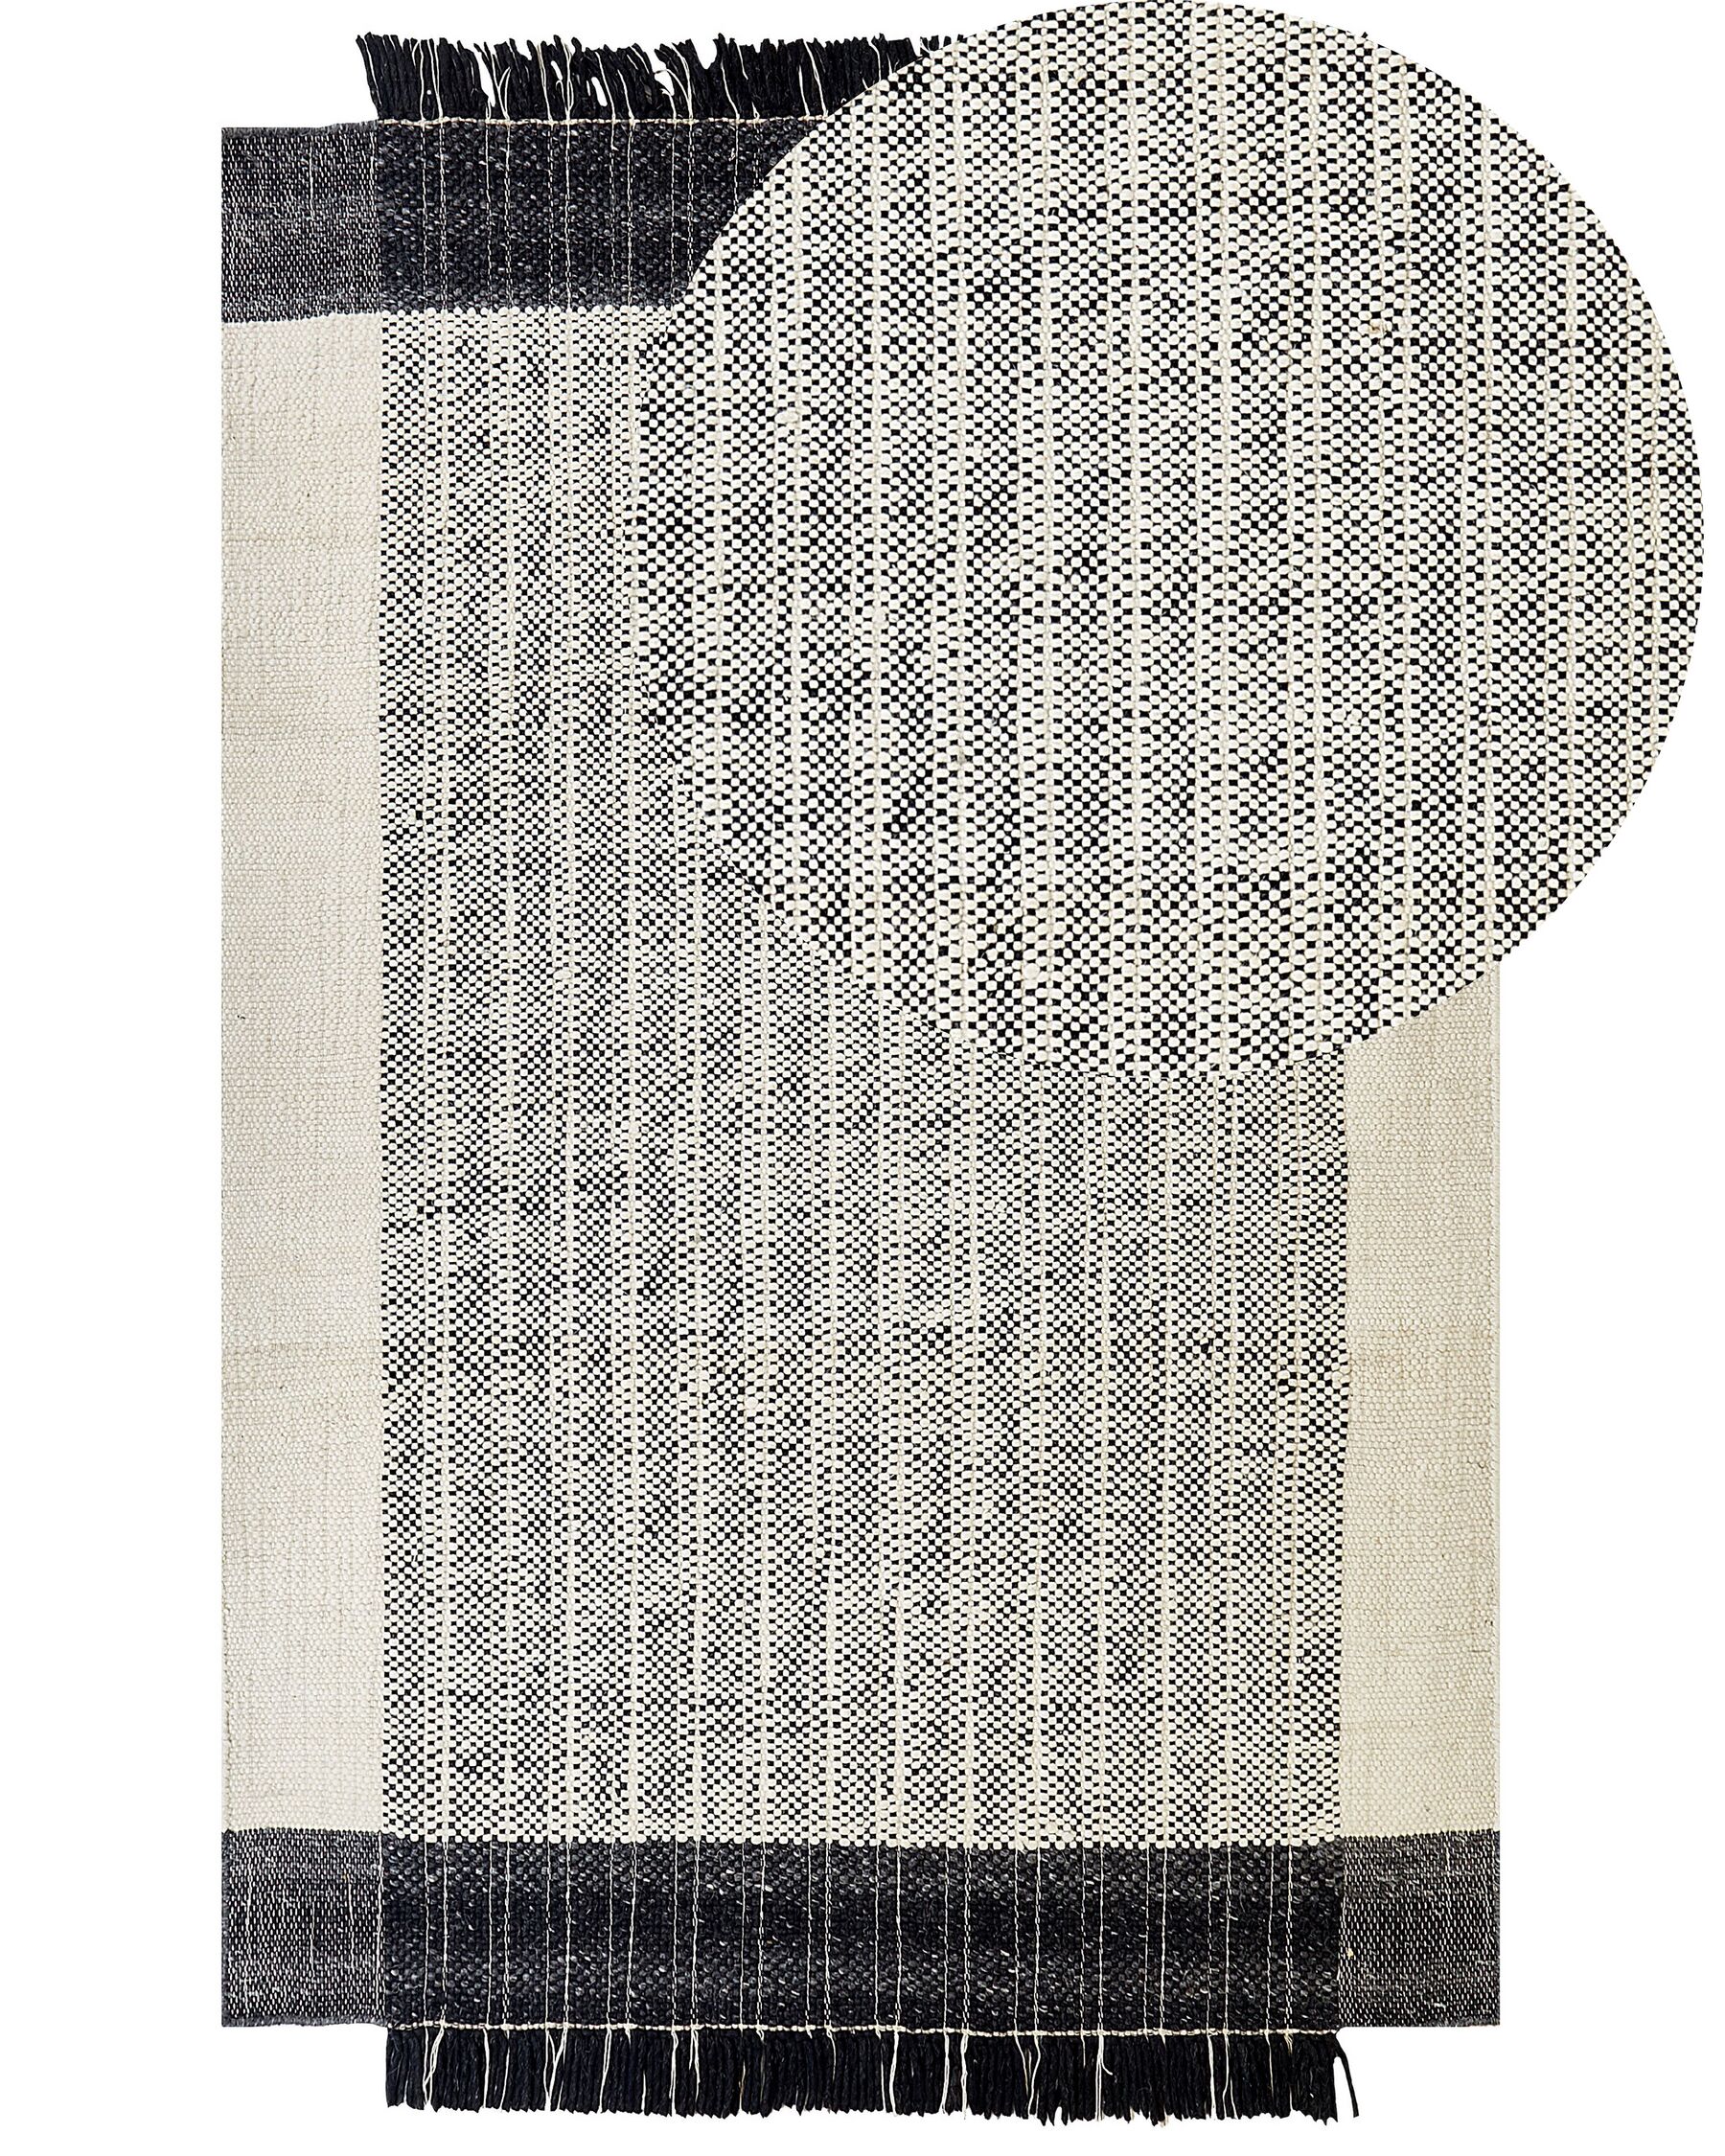 Wool Area Rug 140 x 200 cm Black and White KETENLI_847444